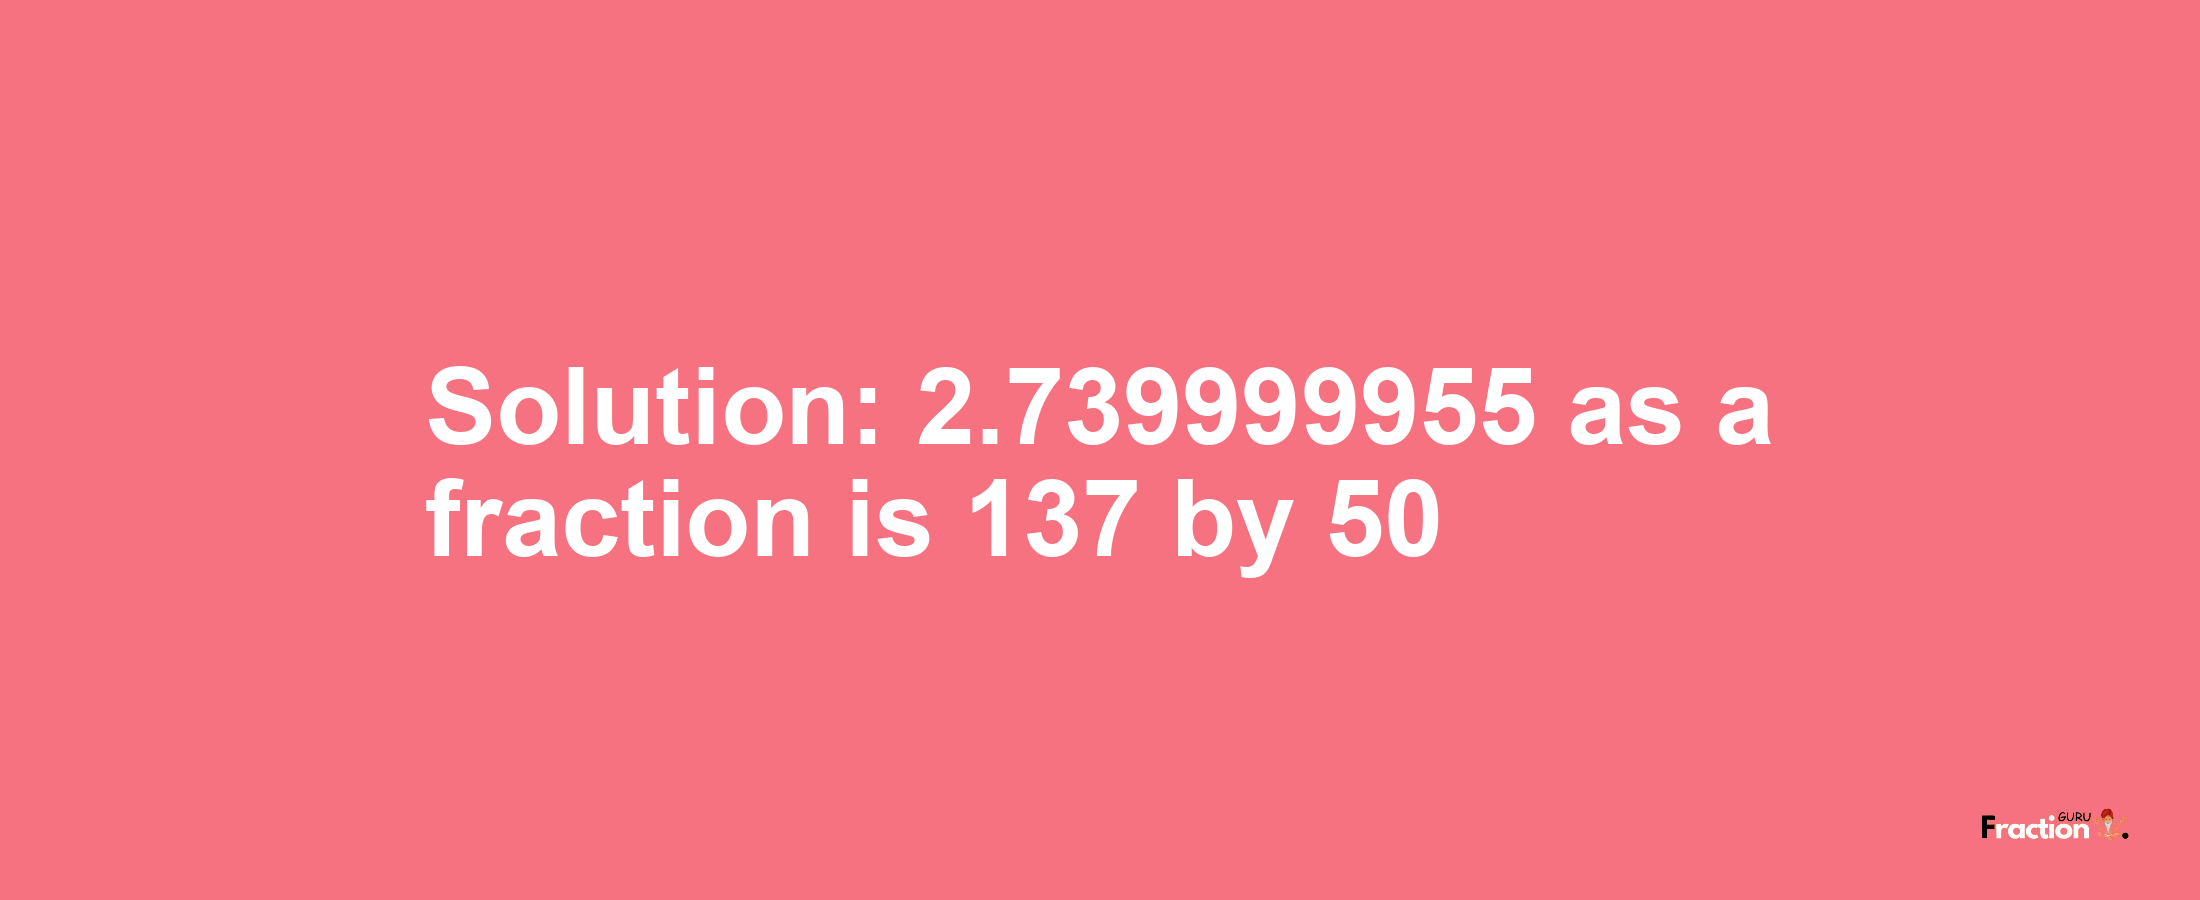 Solution:2.739999955 as a fraction is 137/50